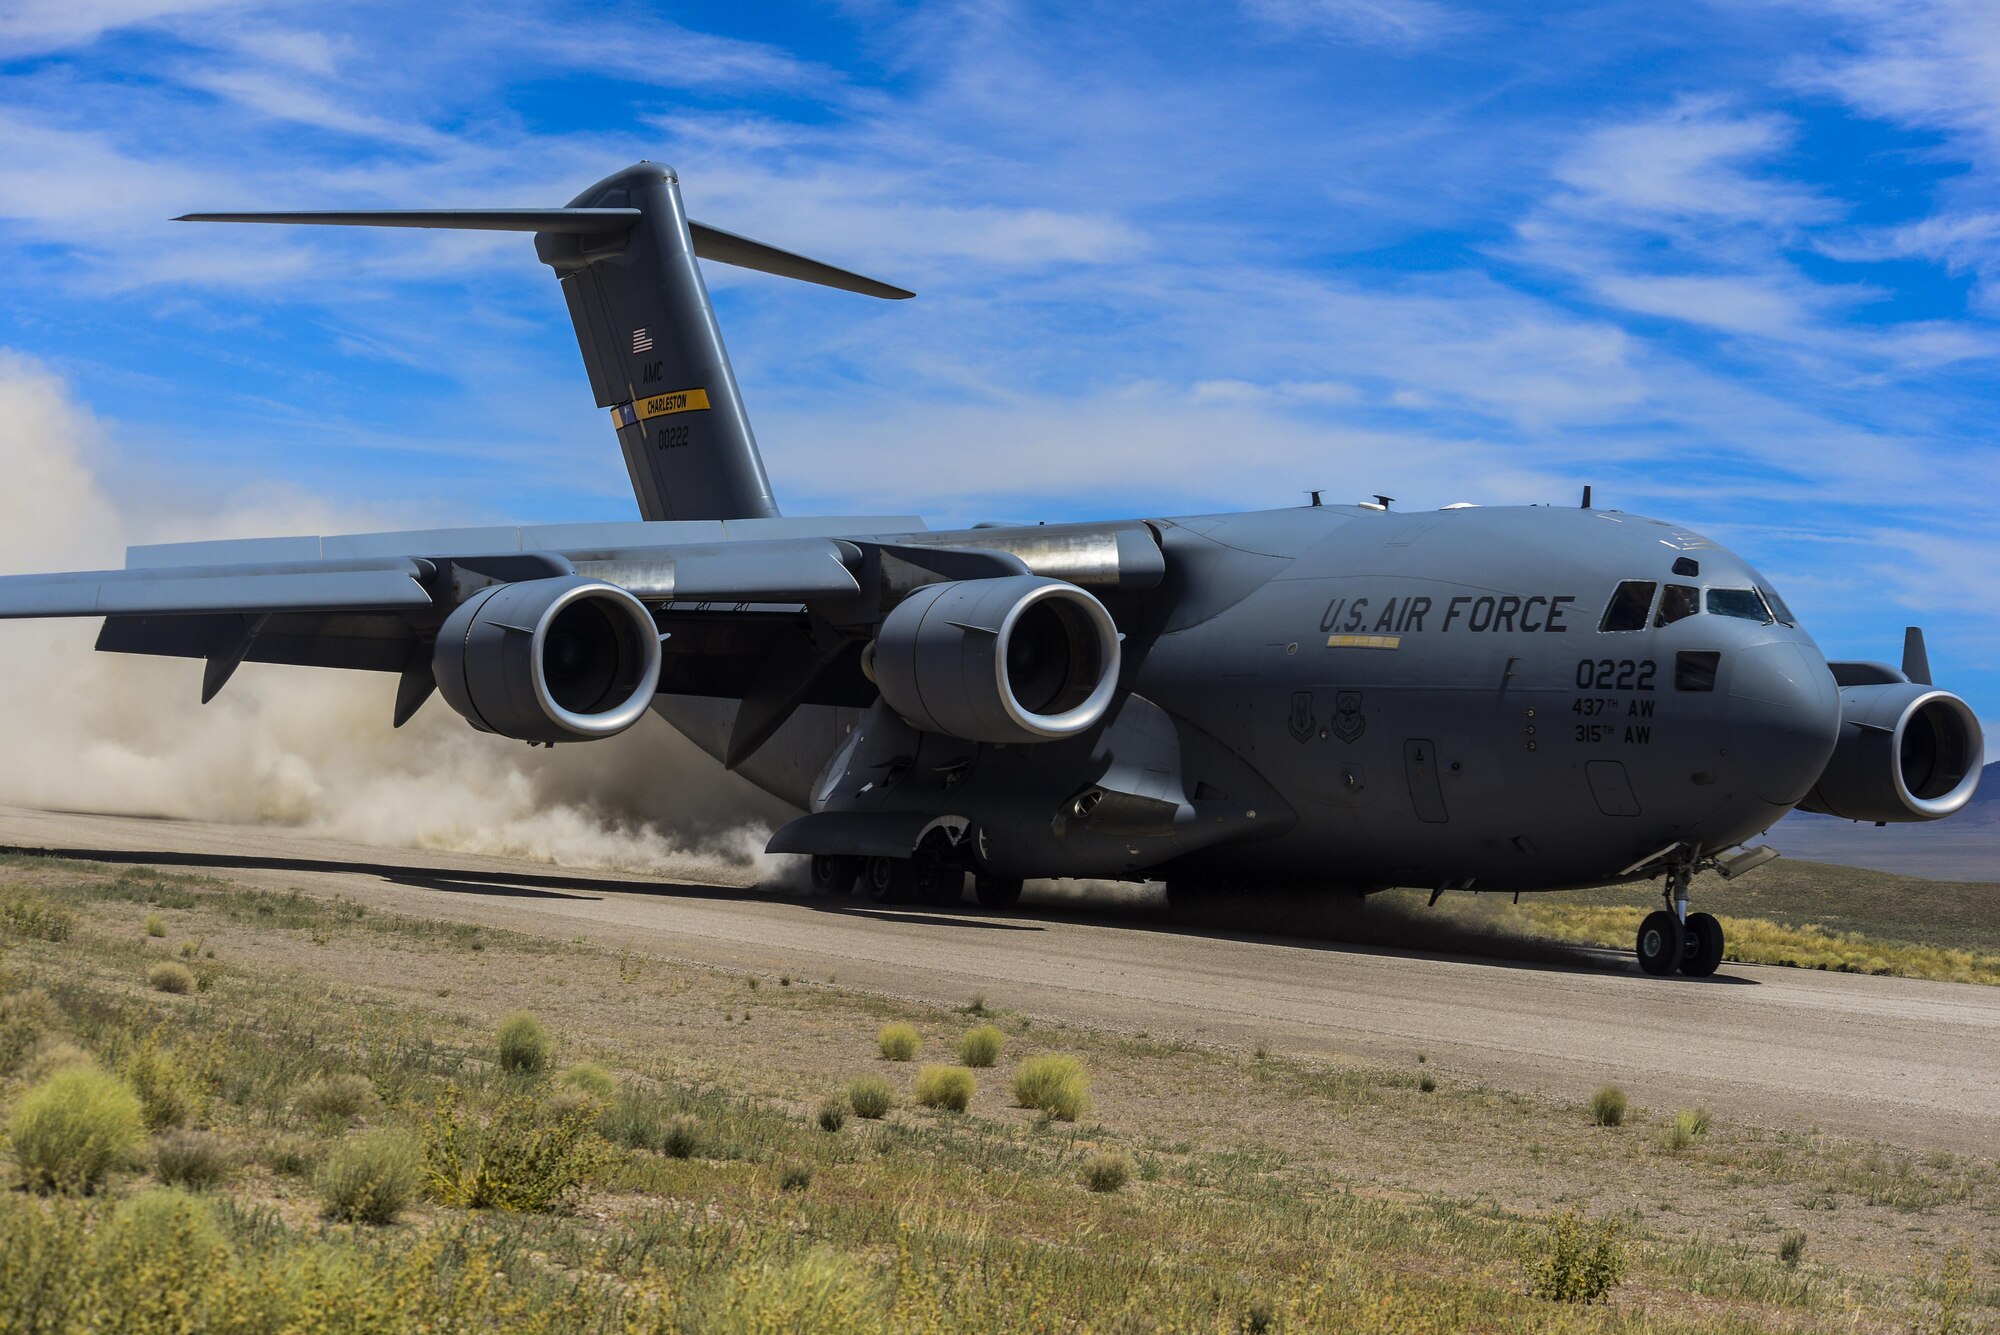 A C-17 Globemaster III, assigned to the 17th Weapons Squadron, Nellis Air Force Base, Nevada, lands on an airstrip in the Nevada Test and Training Range during Joint Forcible Entry Exercise, June 16, 2016. JFEX is meant to be a challenge for aircrews and ground combat units involved, it's just as much an evaluation of the mission leadership's ability to efficiently integrate ground forces and dissimilar aircraft into one "strike package."  (U.S. Air Force photo by Airman 1st Class Kevin Tanenbaum)